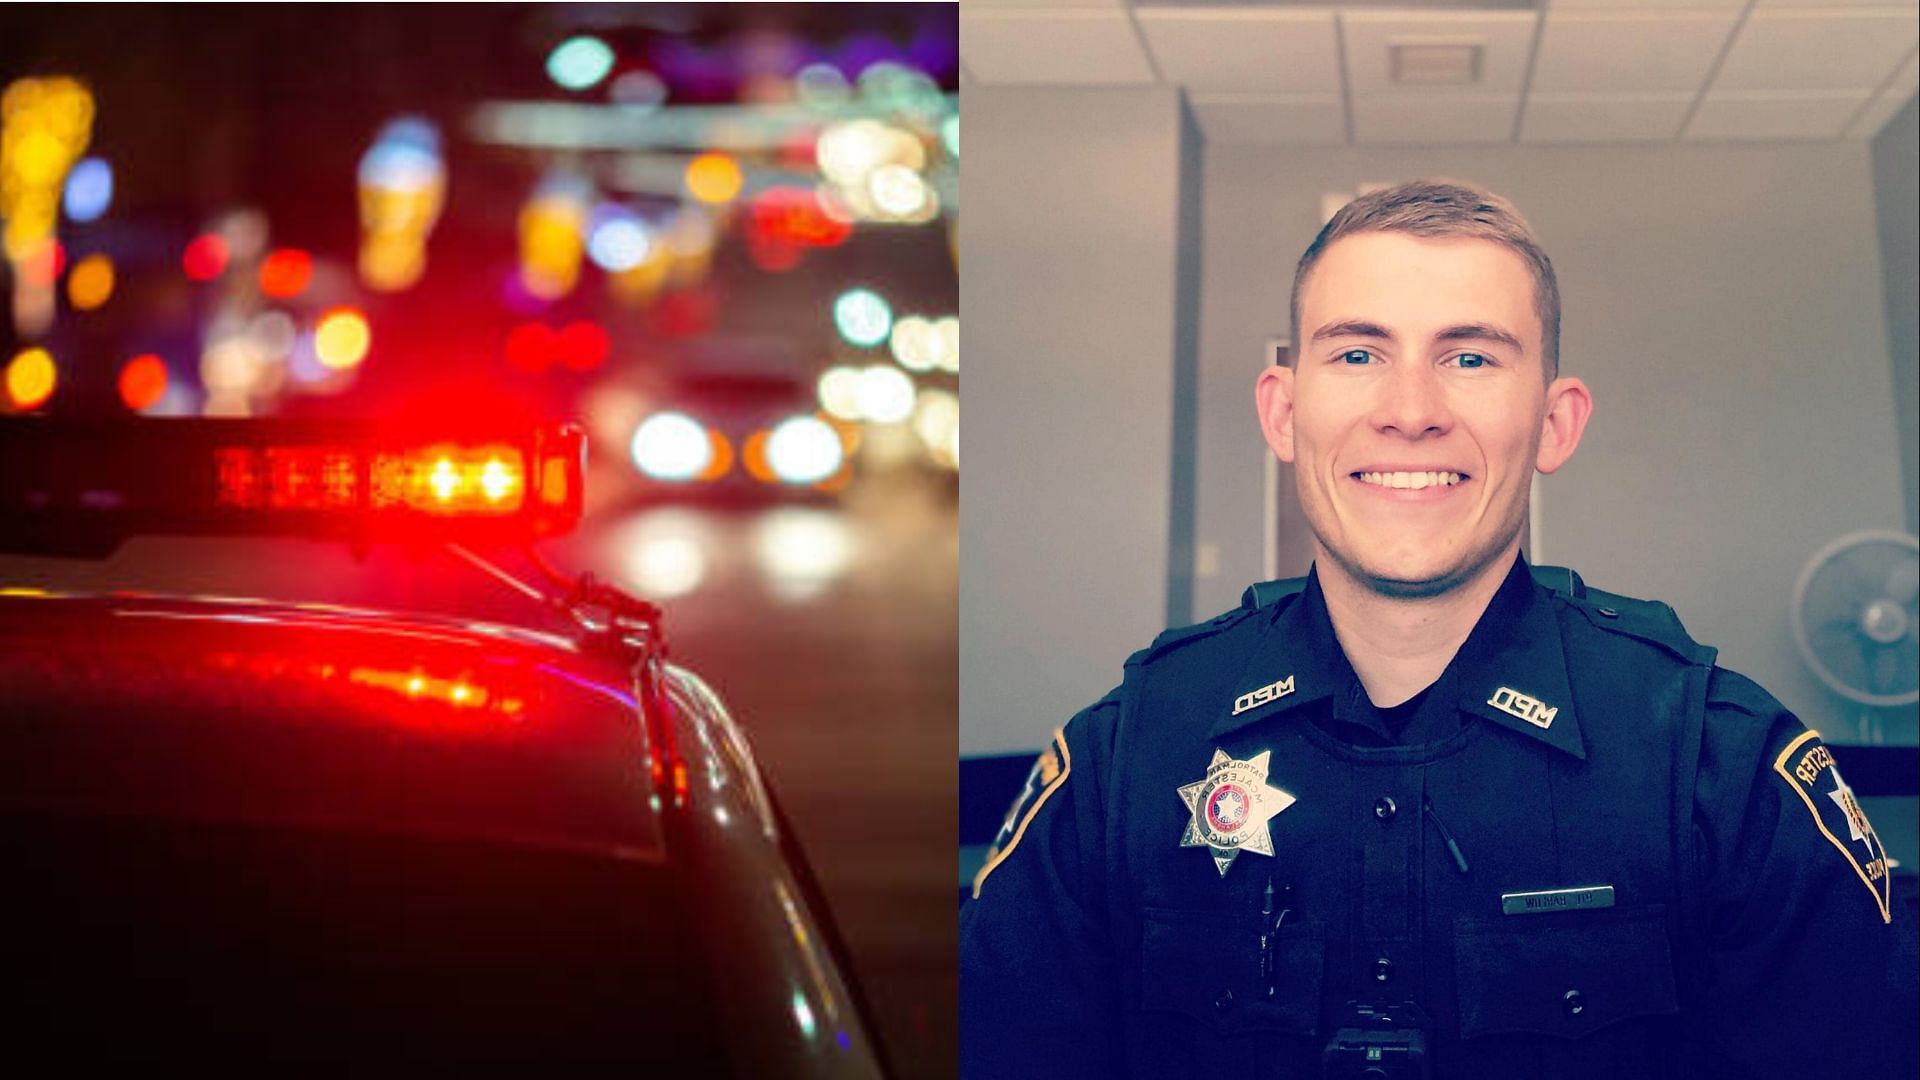 McAlester Police Officer Joseph Barlow dies in a head-on collision on Monday (Image via iStock Images, Facebook/McAlester Police Department)